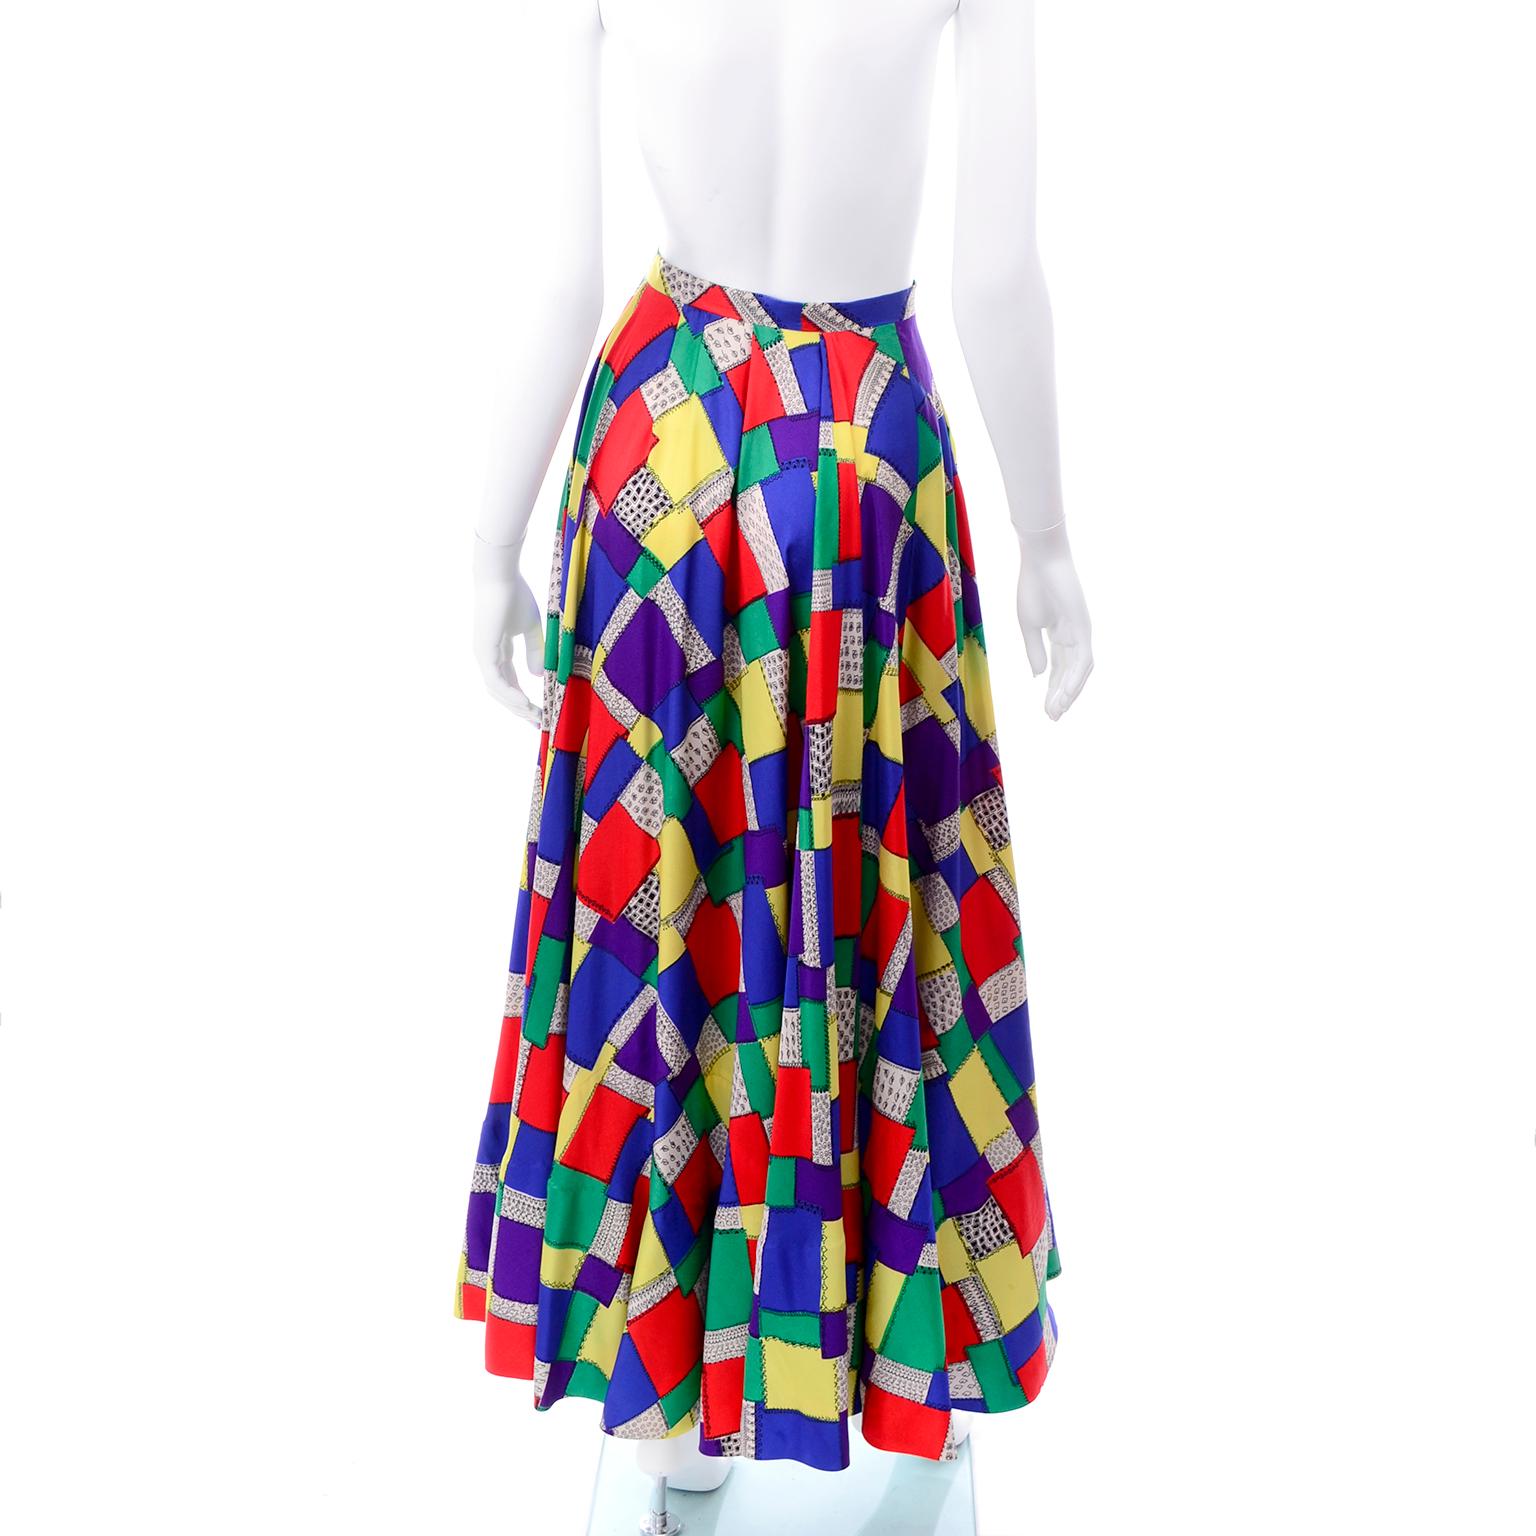 Women's 1940s Vintage Skirt in Patchwork Color block Print from Gilbert Adrian Collector For Sale